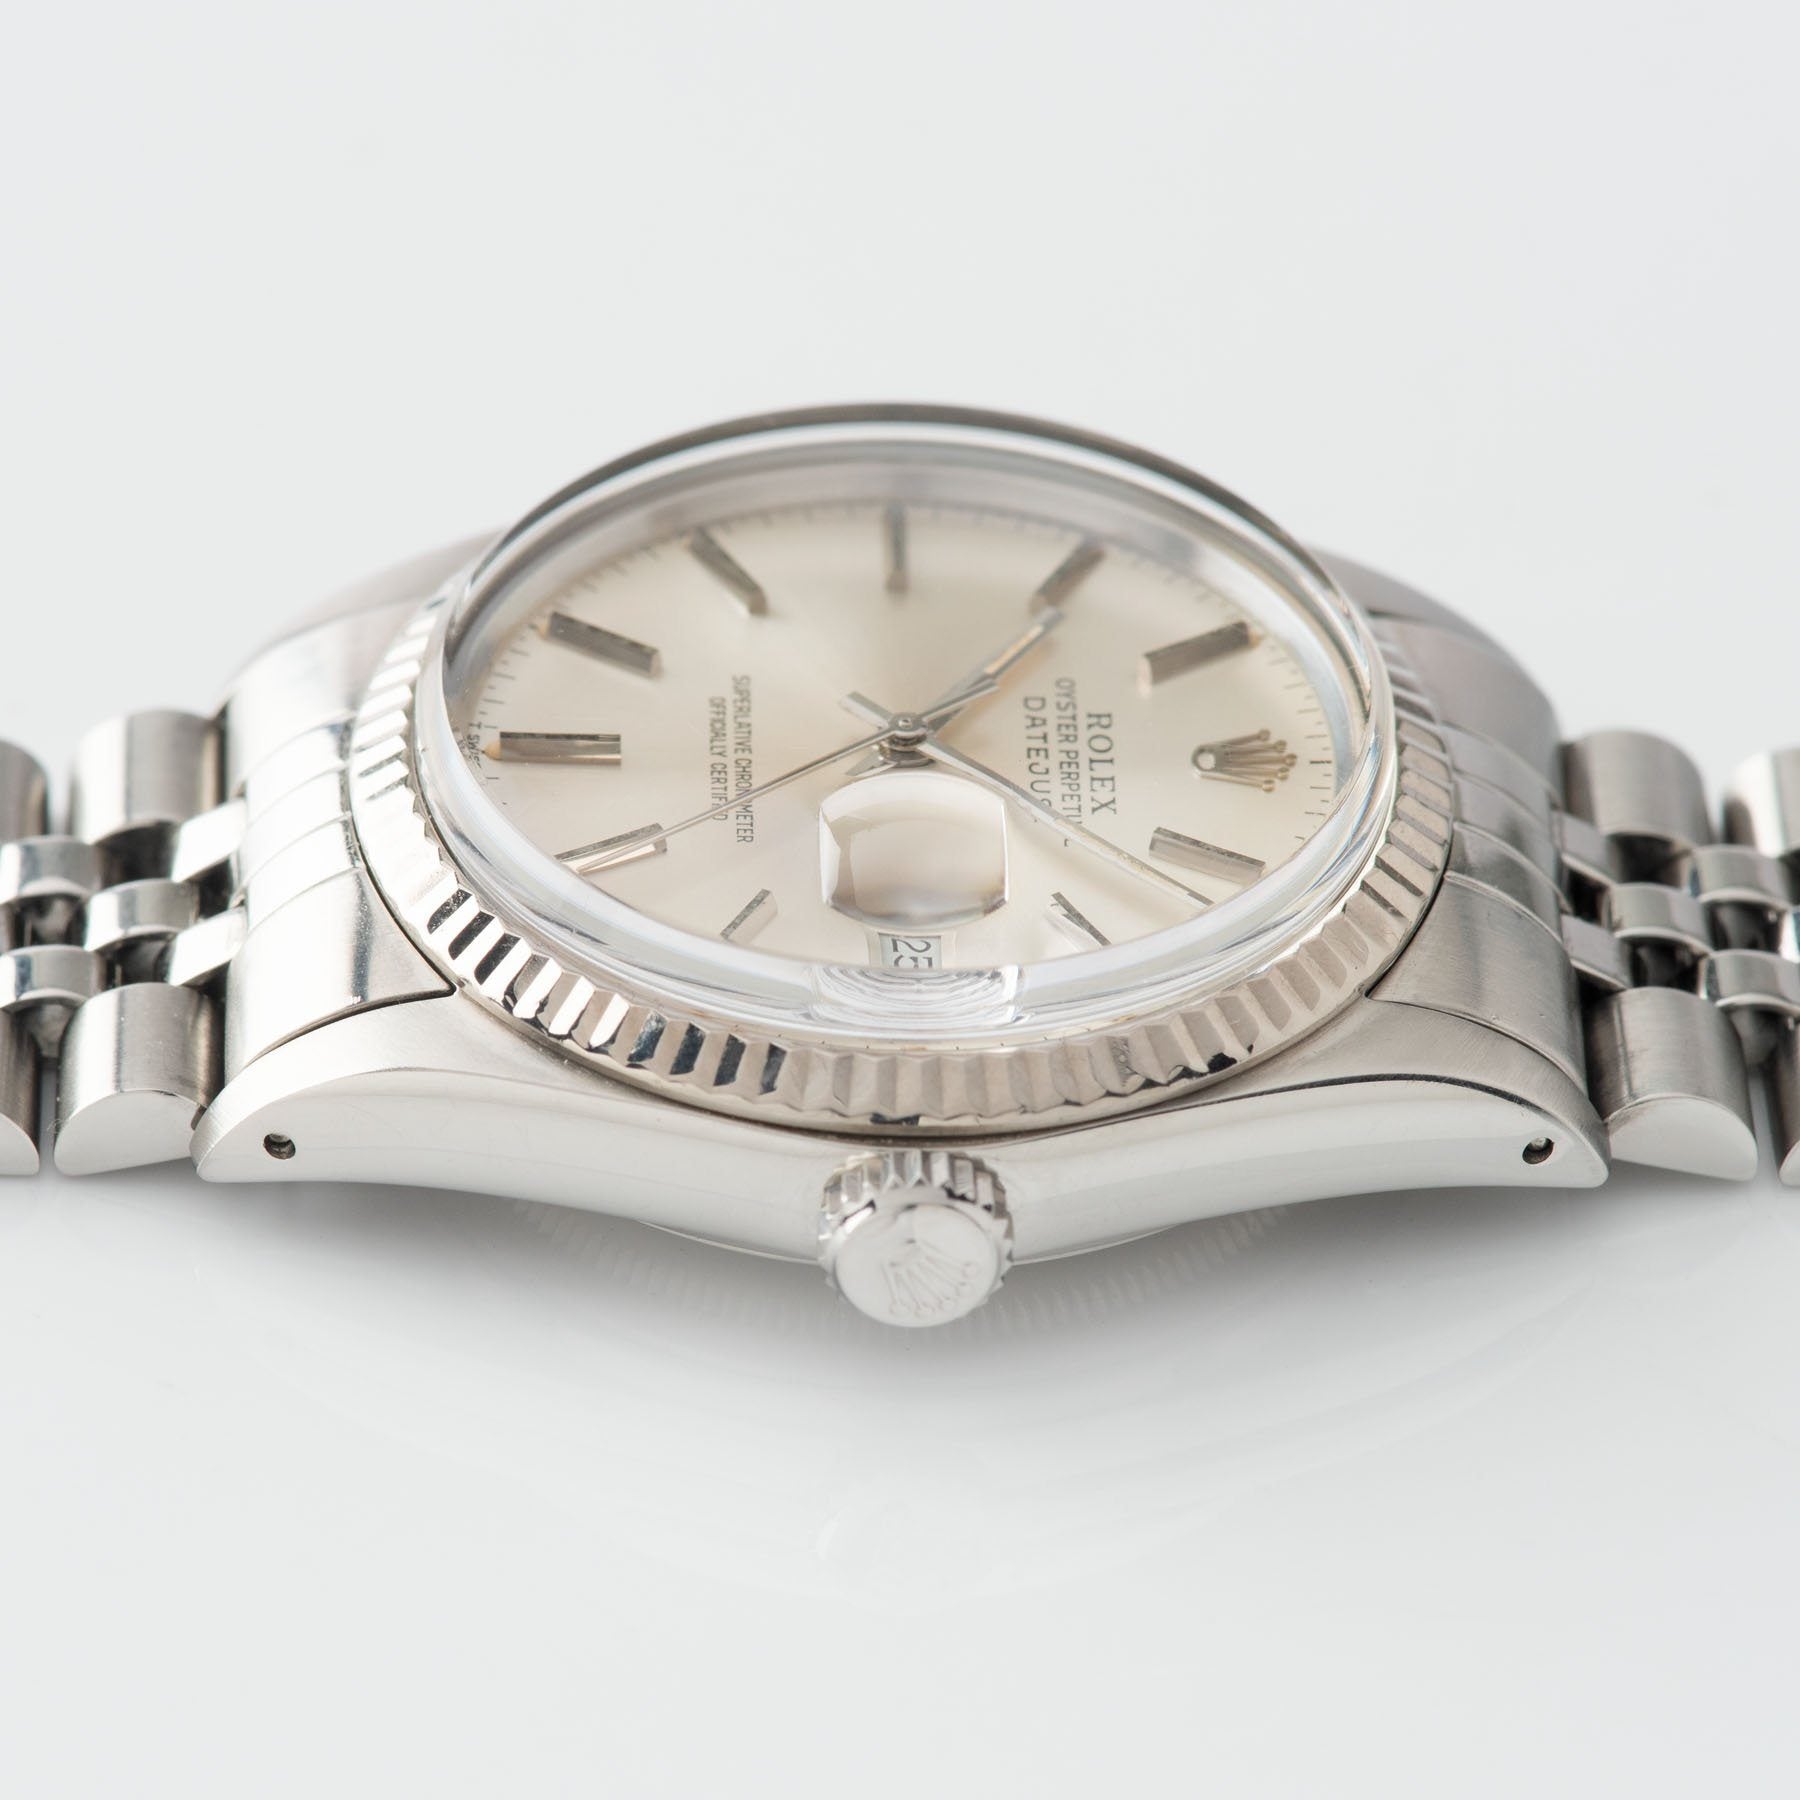 Rolex Datejust Reference 16014 Silver Dial